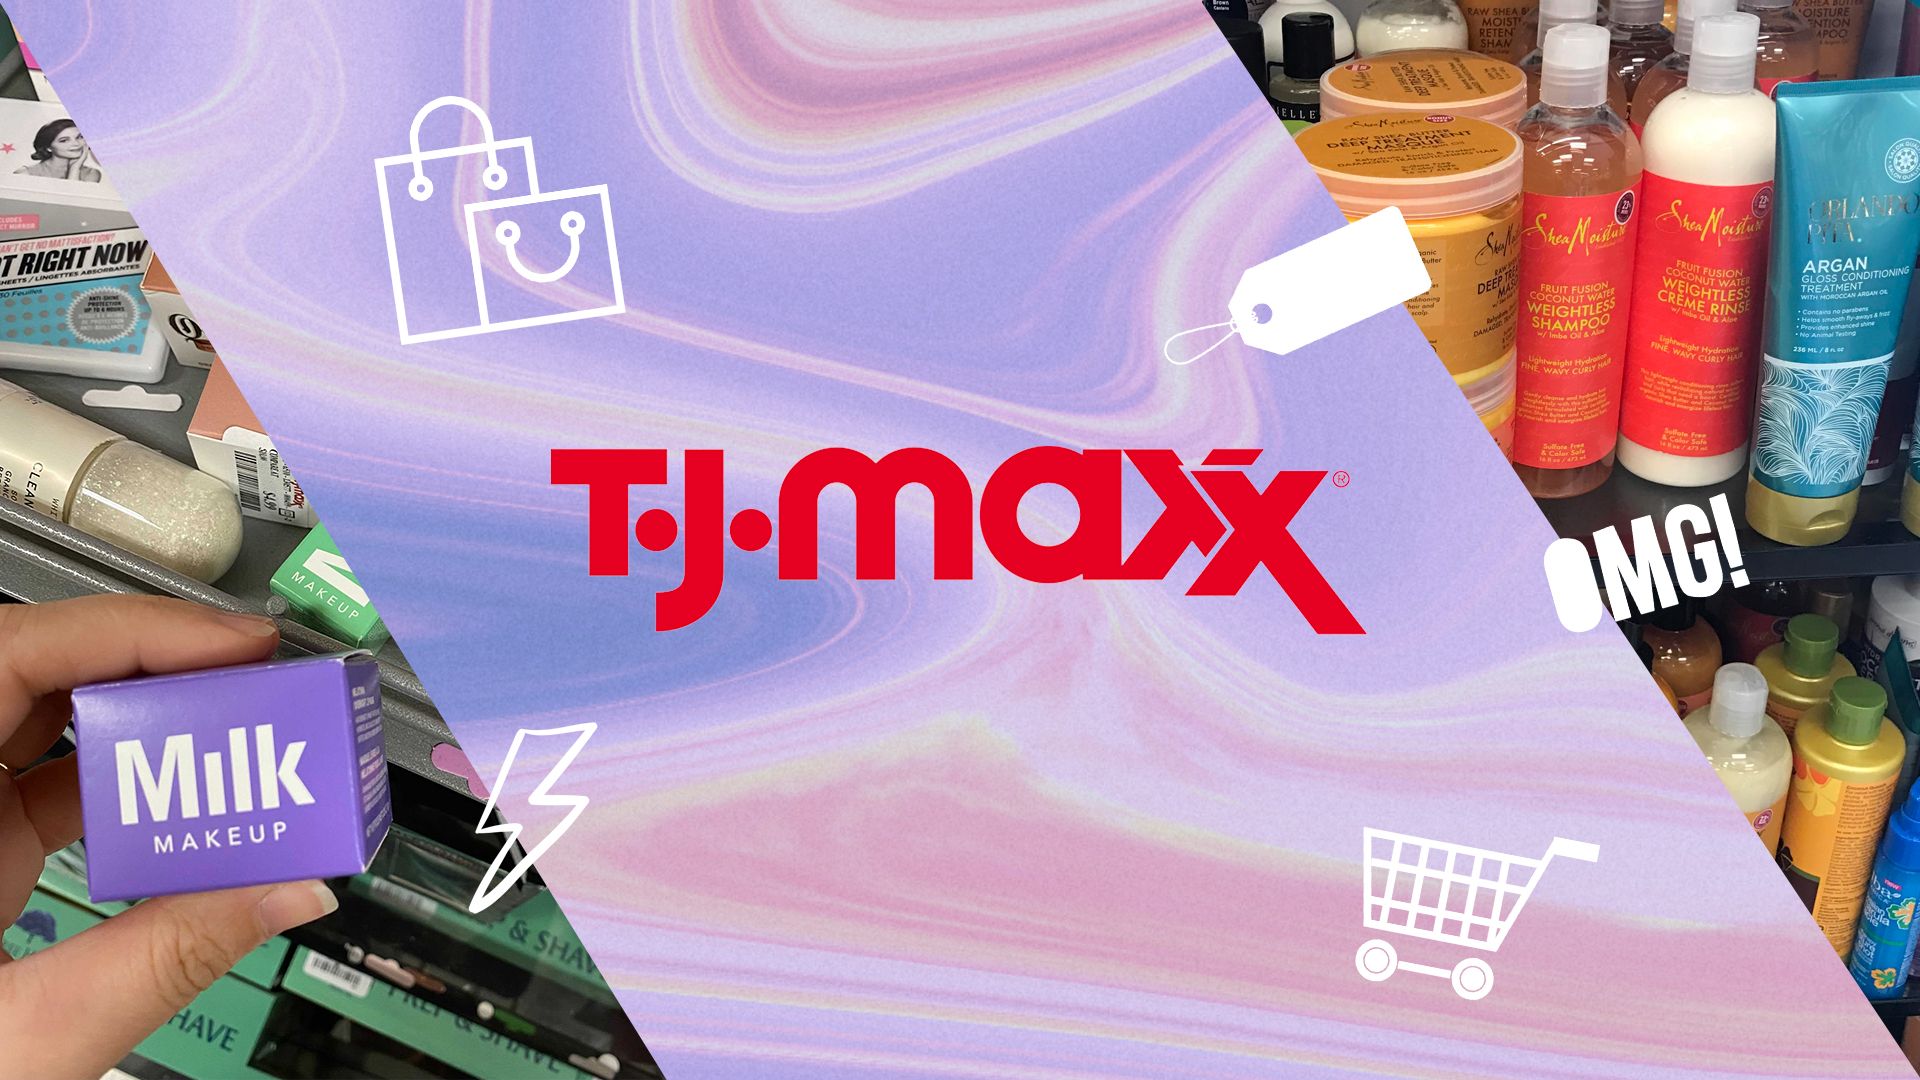 You Can Now Order From TJ Maxx Online Again